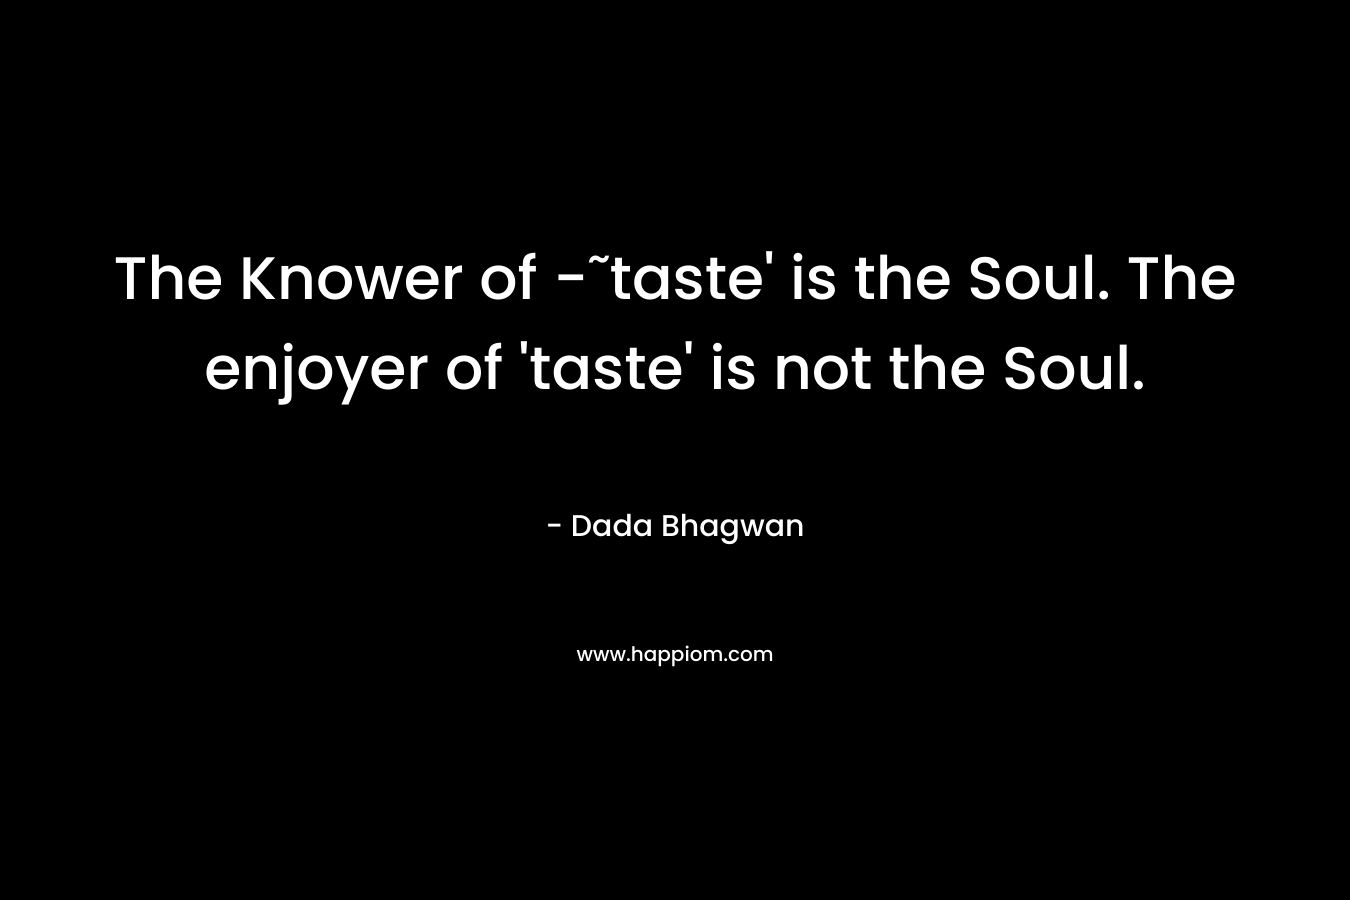 The Knower of -˜taste' is the Soul. The enjoyer of 'taste' is not the Soul.